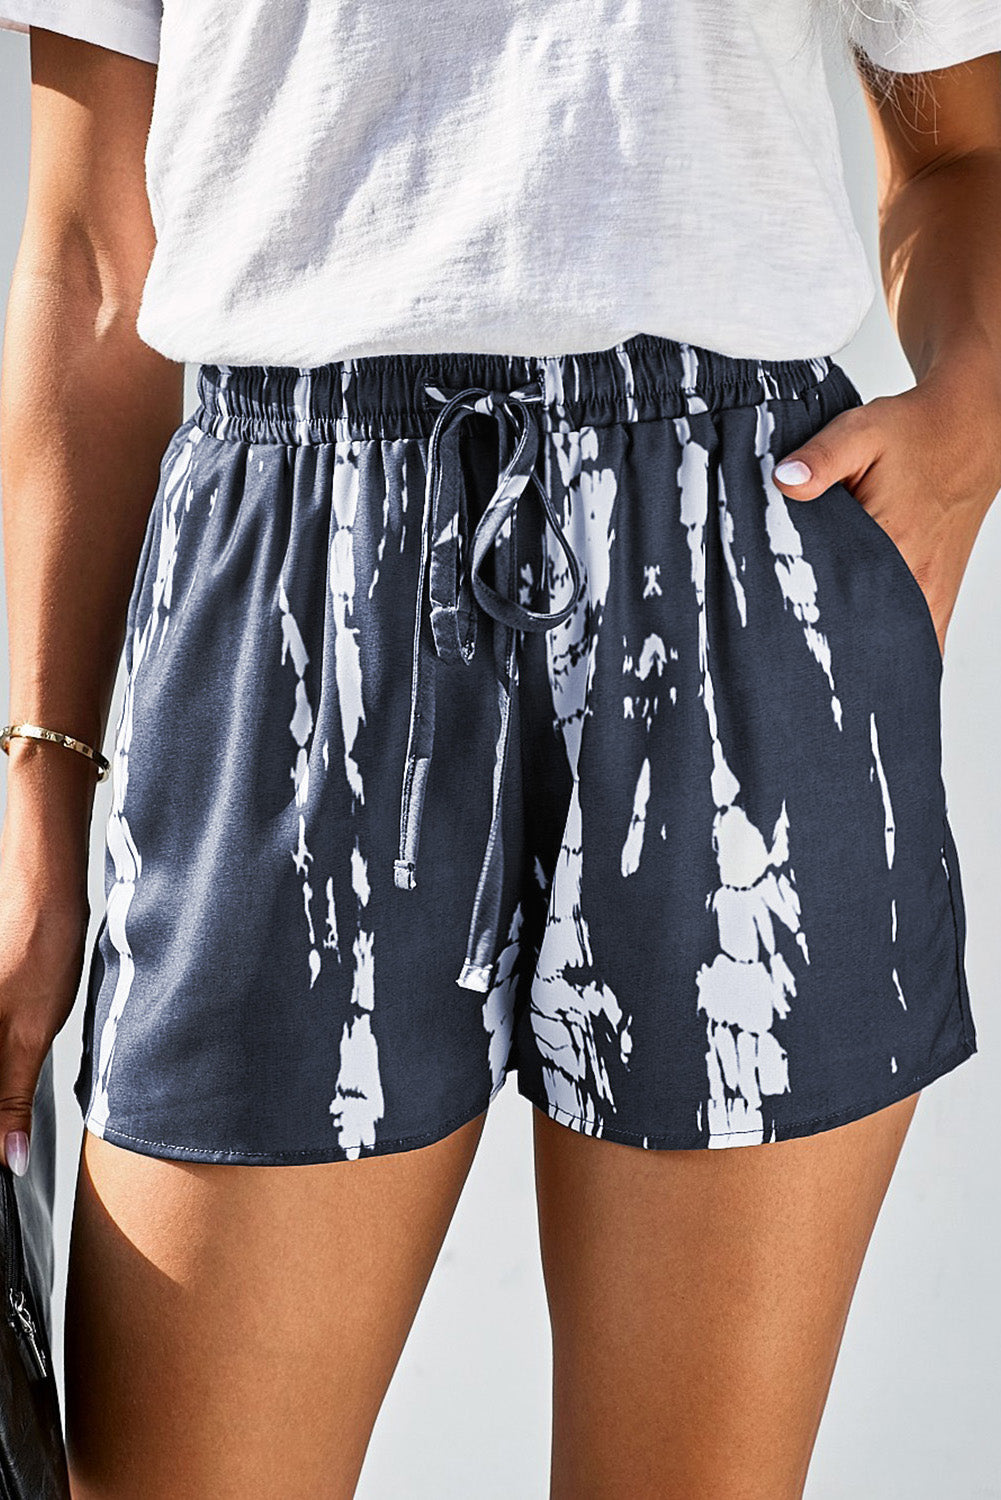 Stay comfy & stylish in our blue tie-dye drawstring shorts with pockets - perfect for summer days out or cozy weekends.